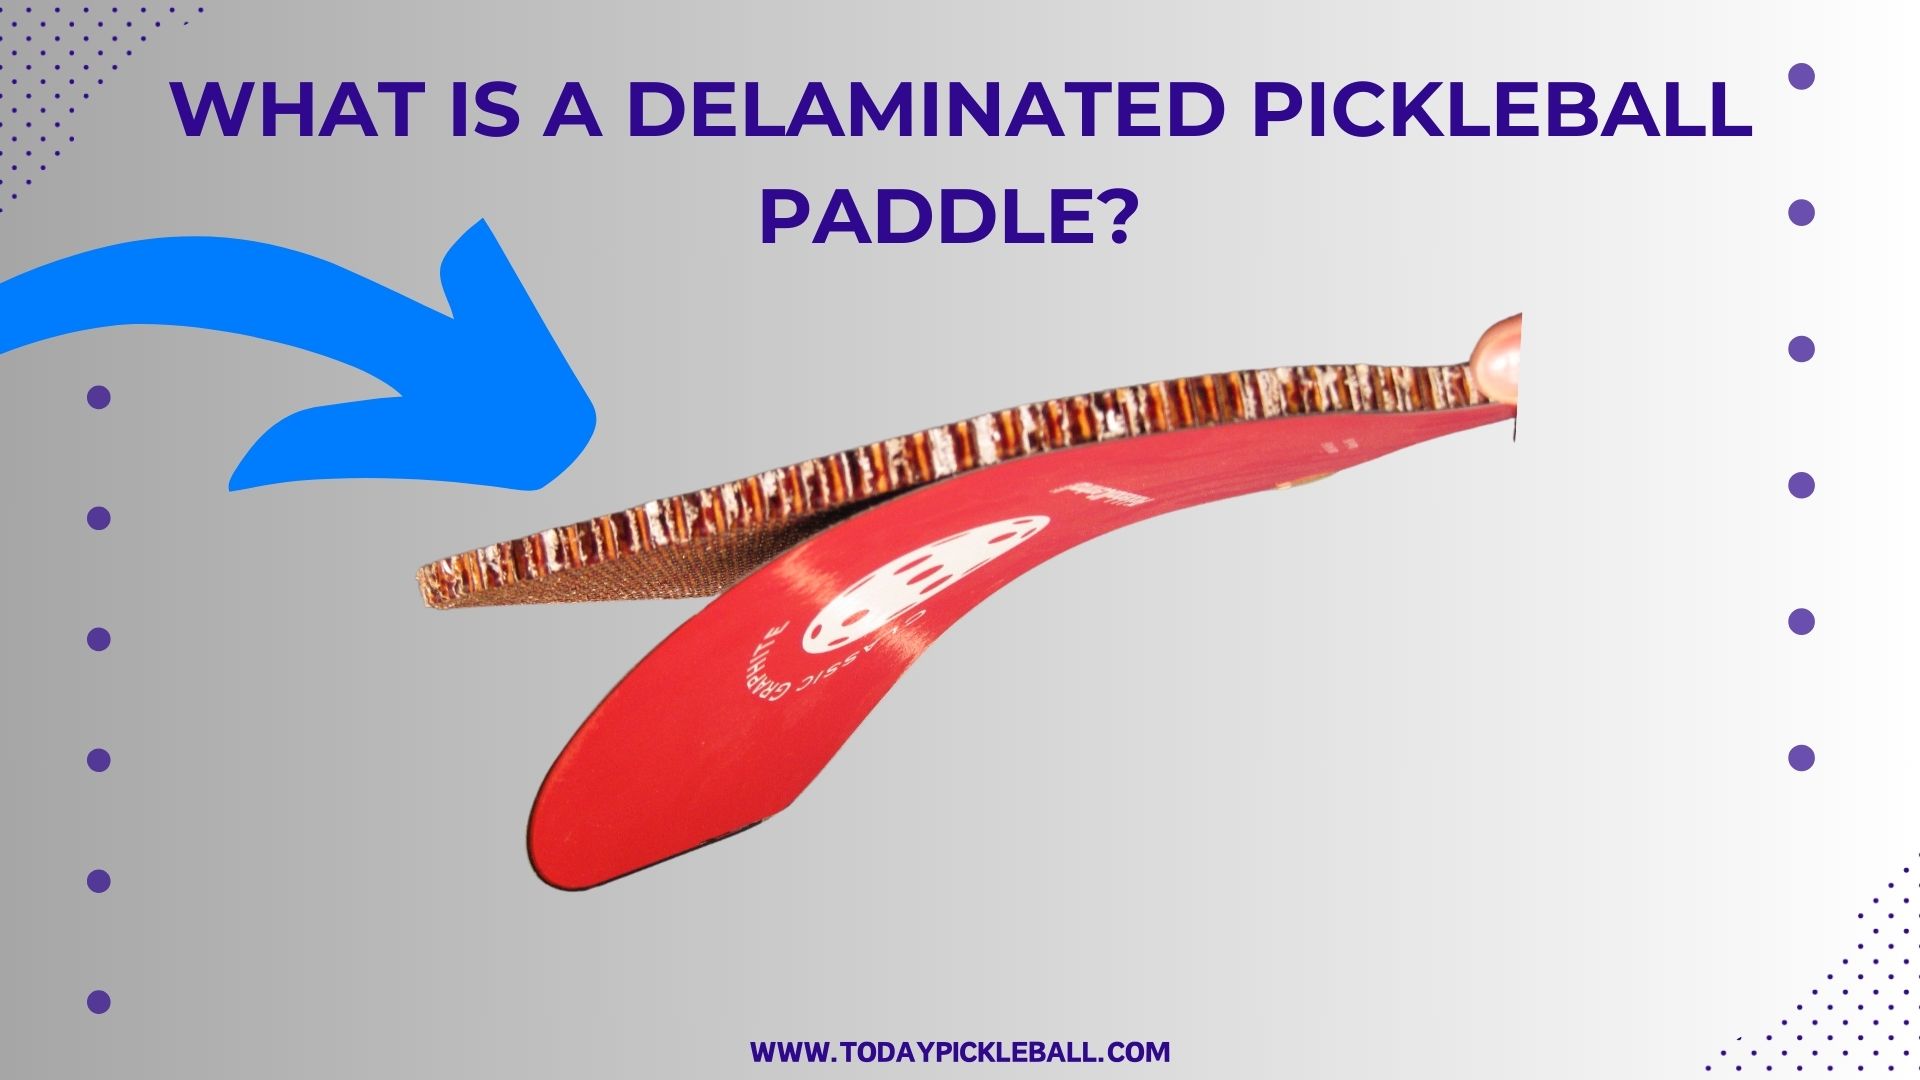 here is the image of damaged paddle to guide you about What Is A Delaminated Pickleball Paddle?